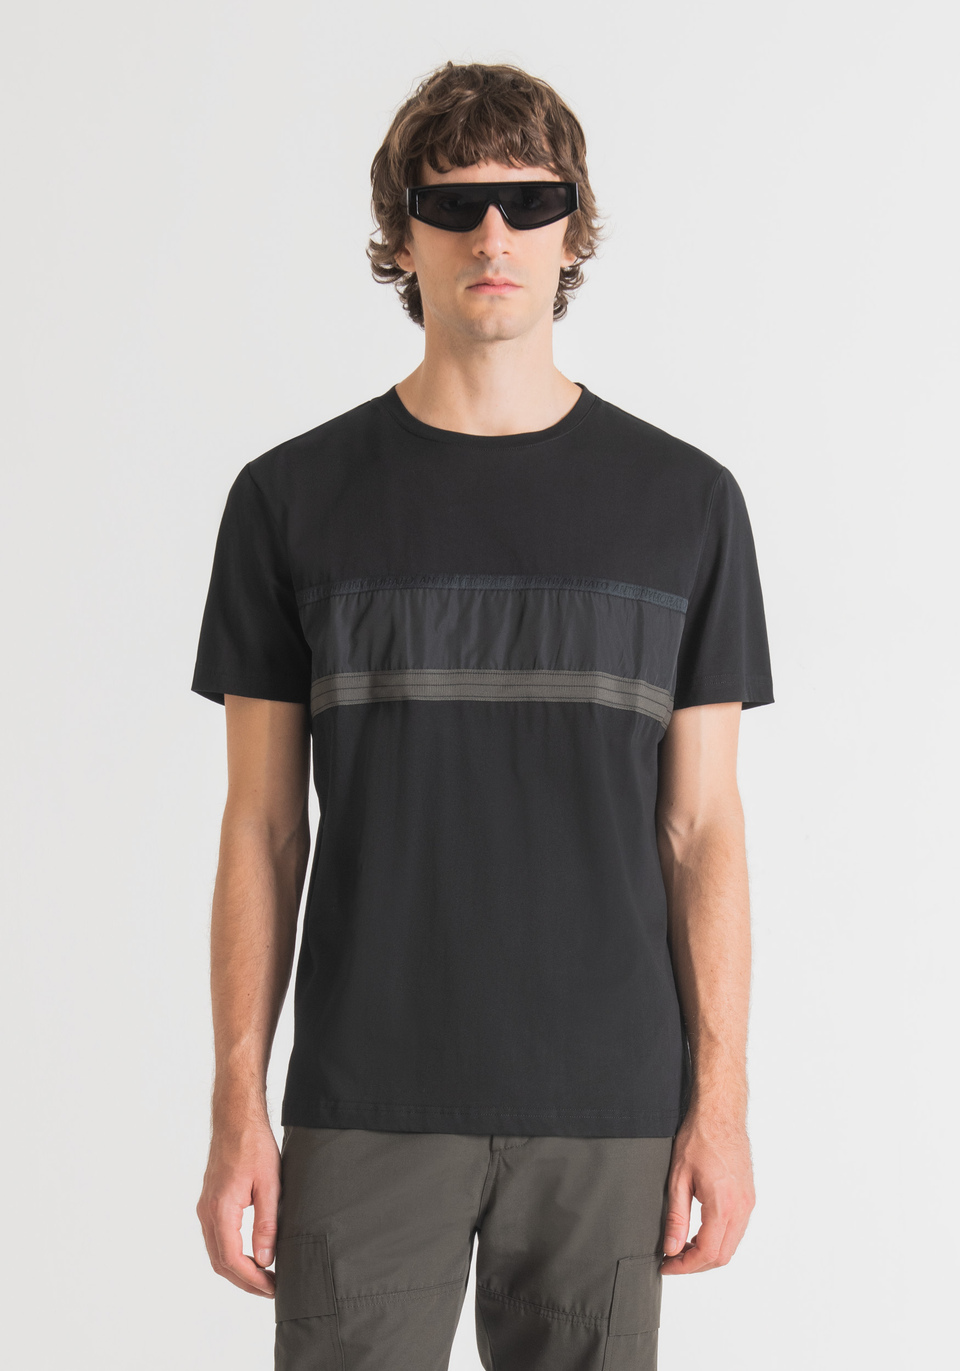 REGULAR FIT T-SHIRT IN PURE COTTON JERSEY WITH CONTRAST DETAILS - Antony Morato Online Shop